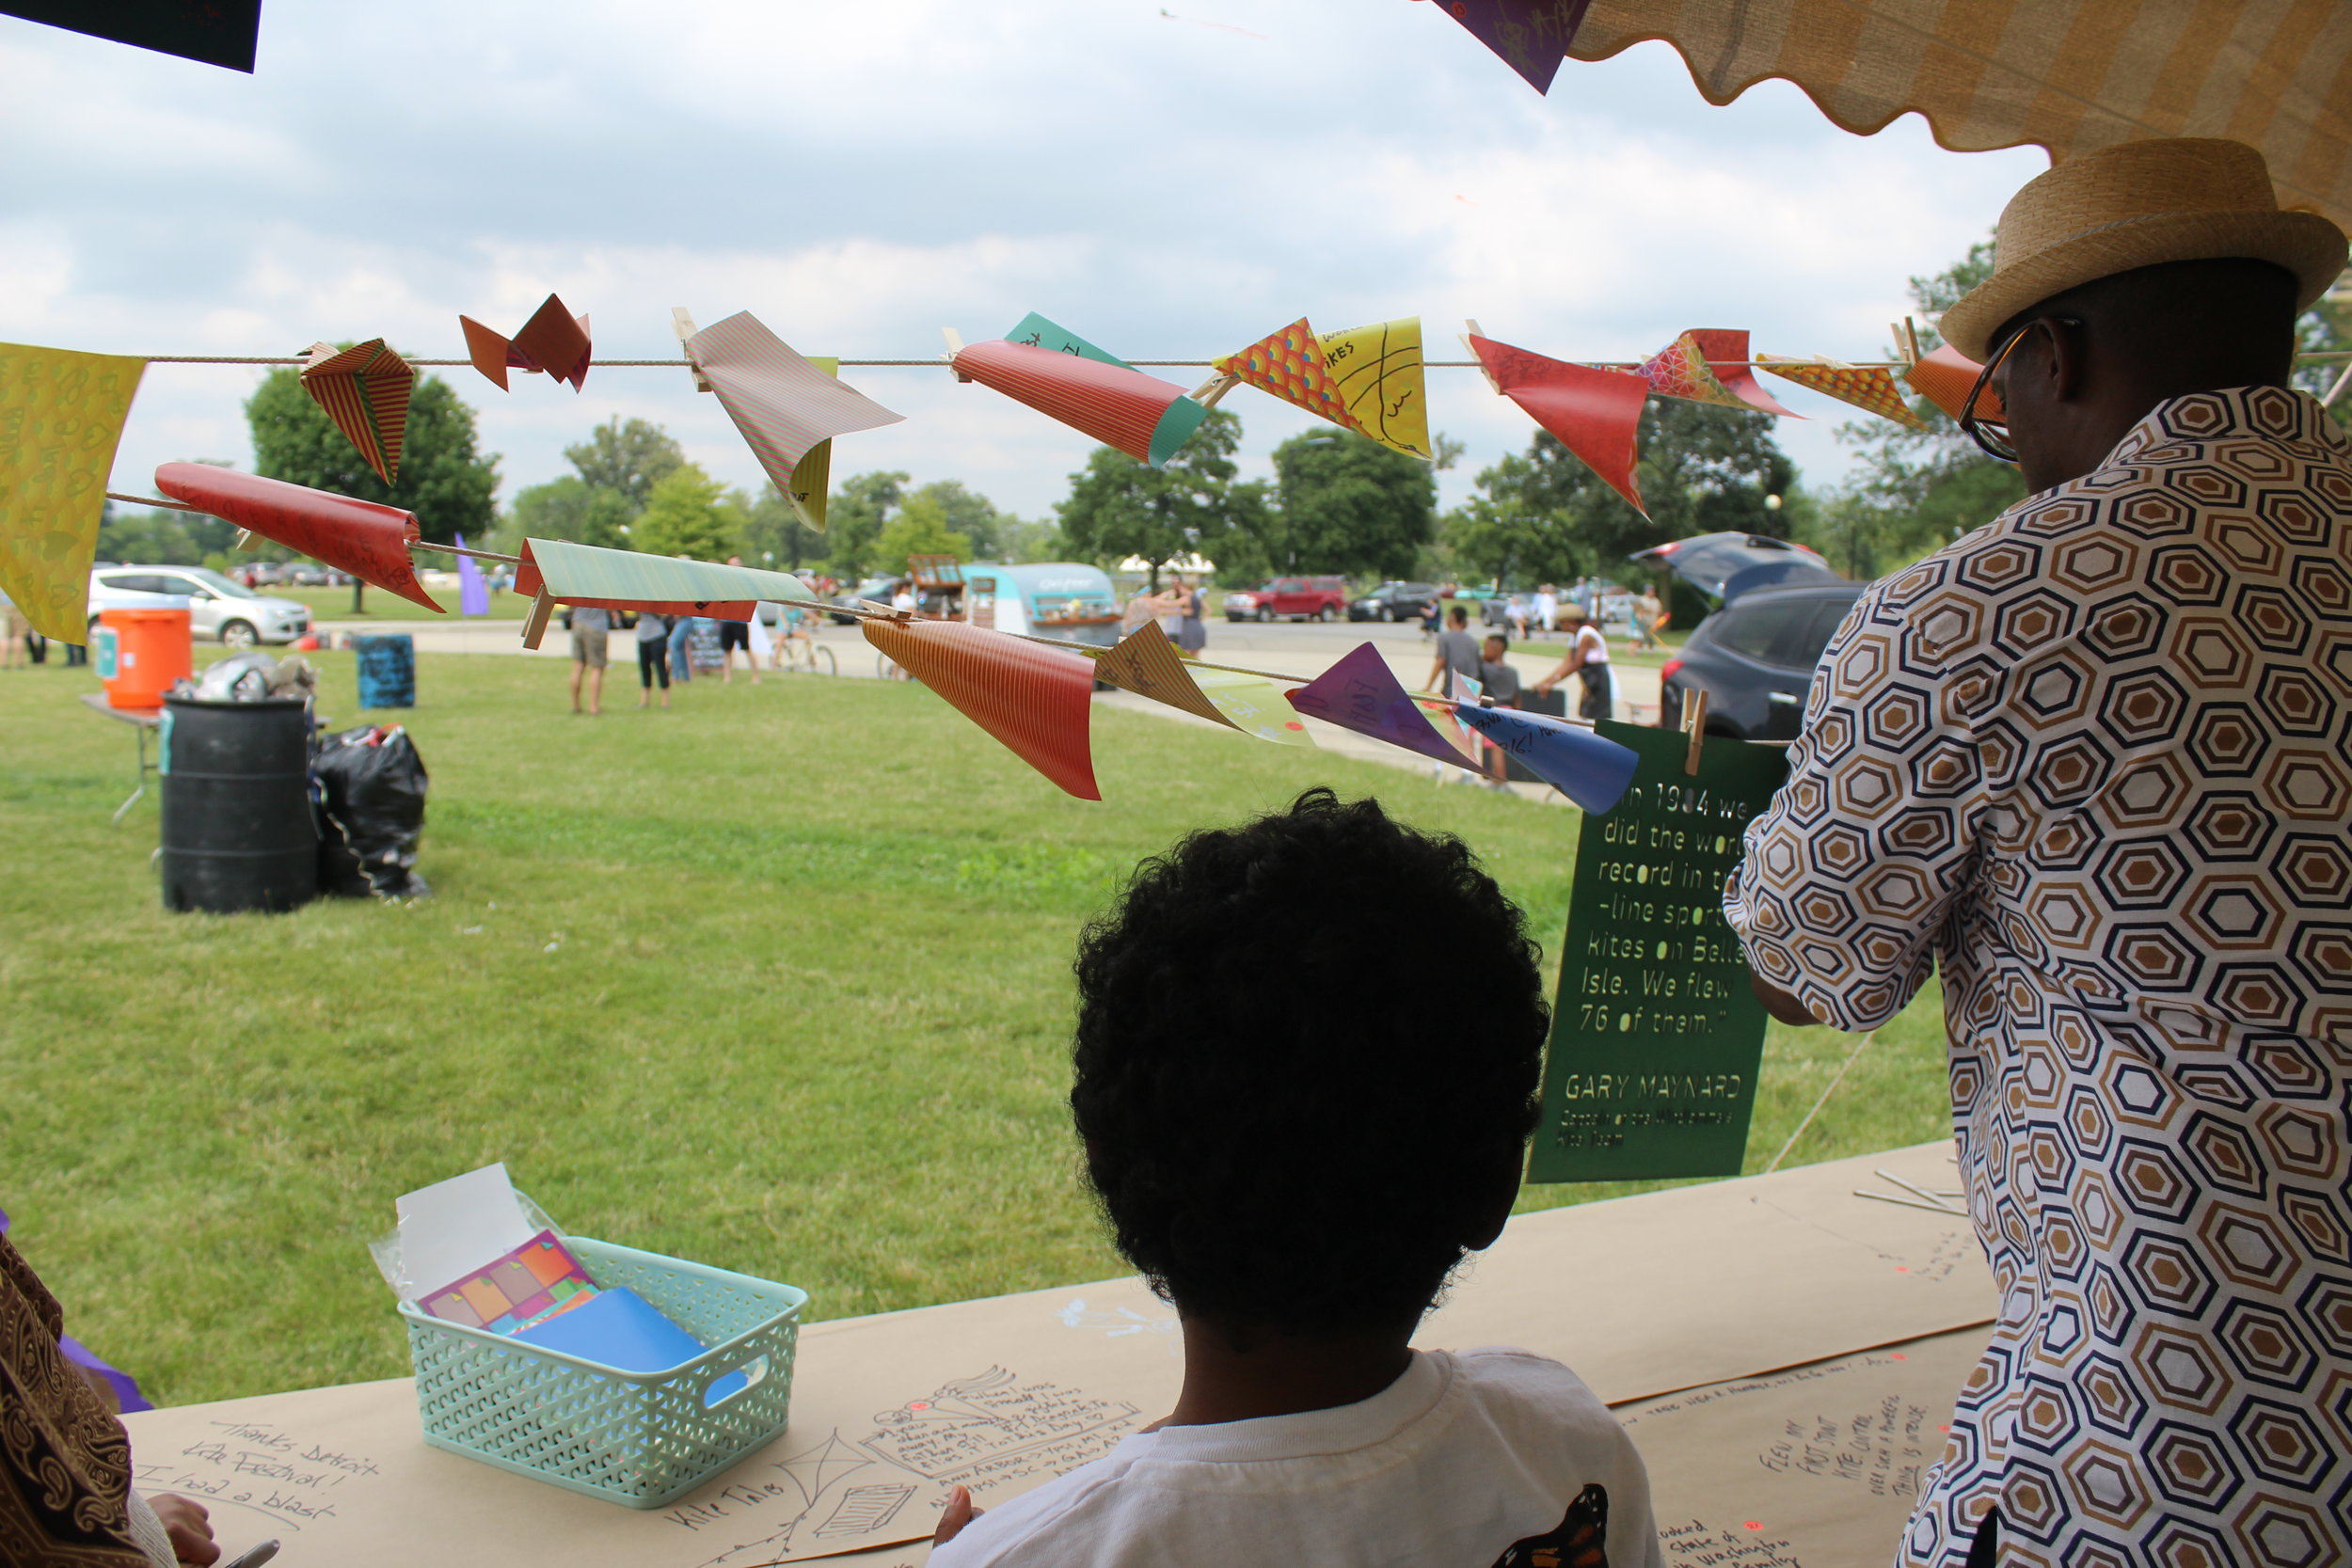  At the Kite Tales Station, people wrote and illustrated their memories, using numbered stickers to locate them on the Memory Map. 